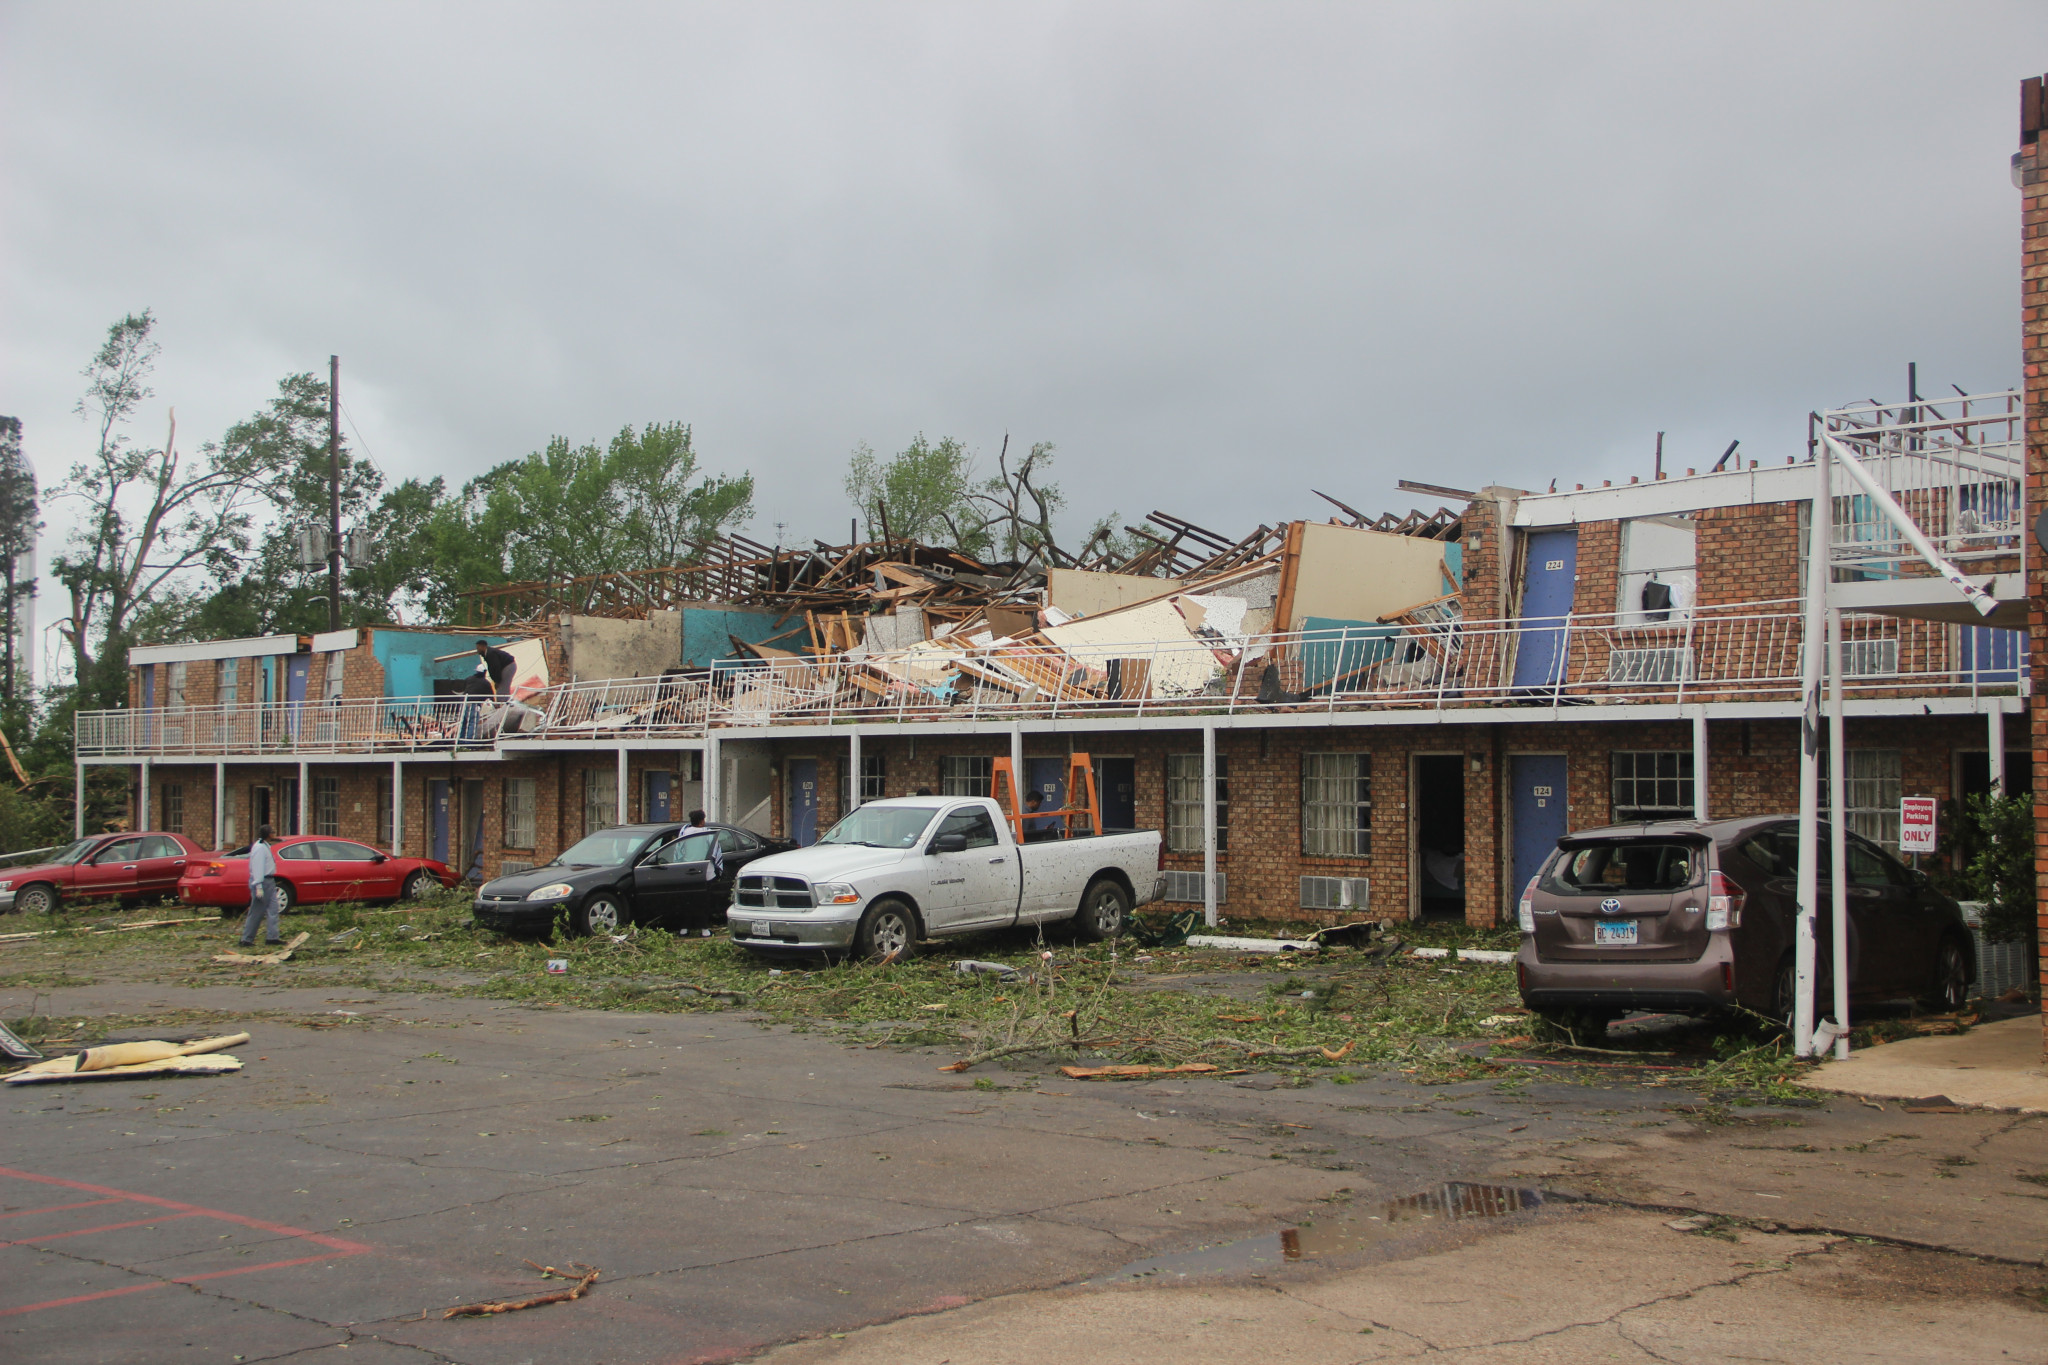 A ground view of the destroyed America's Best Value Inn as it stood the morning after the storm.